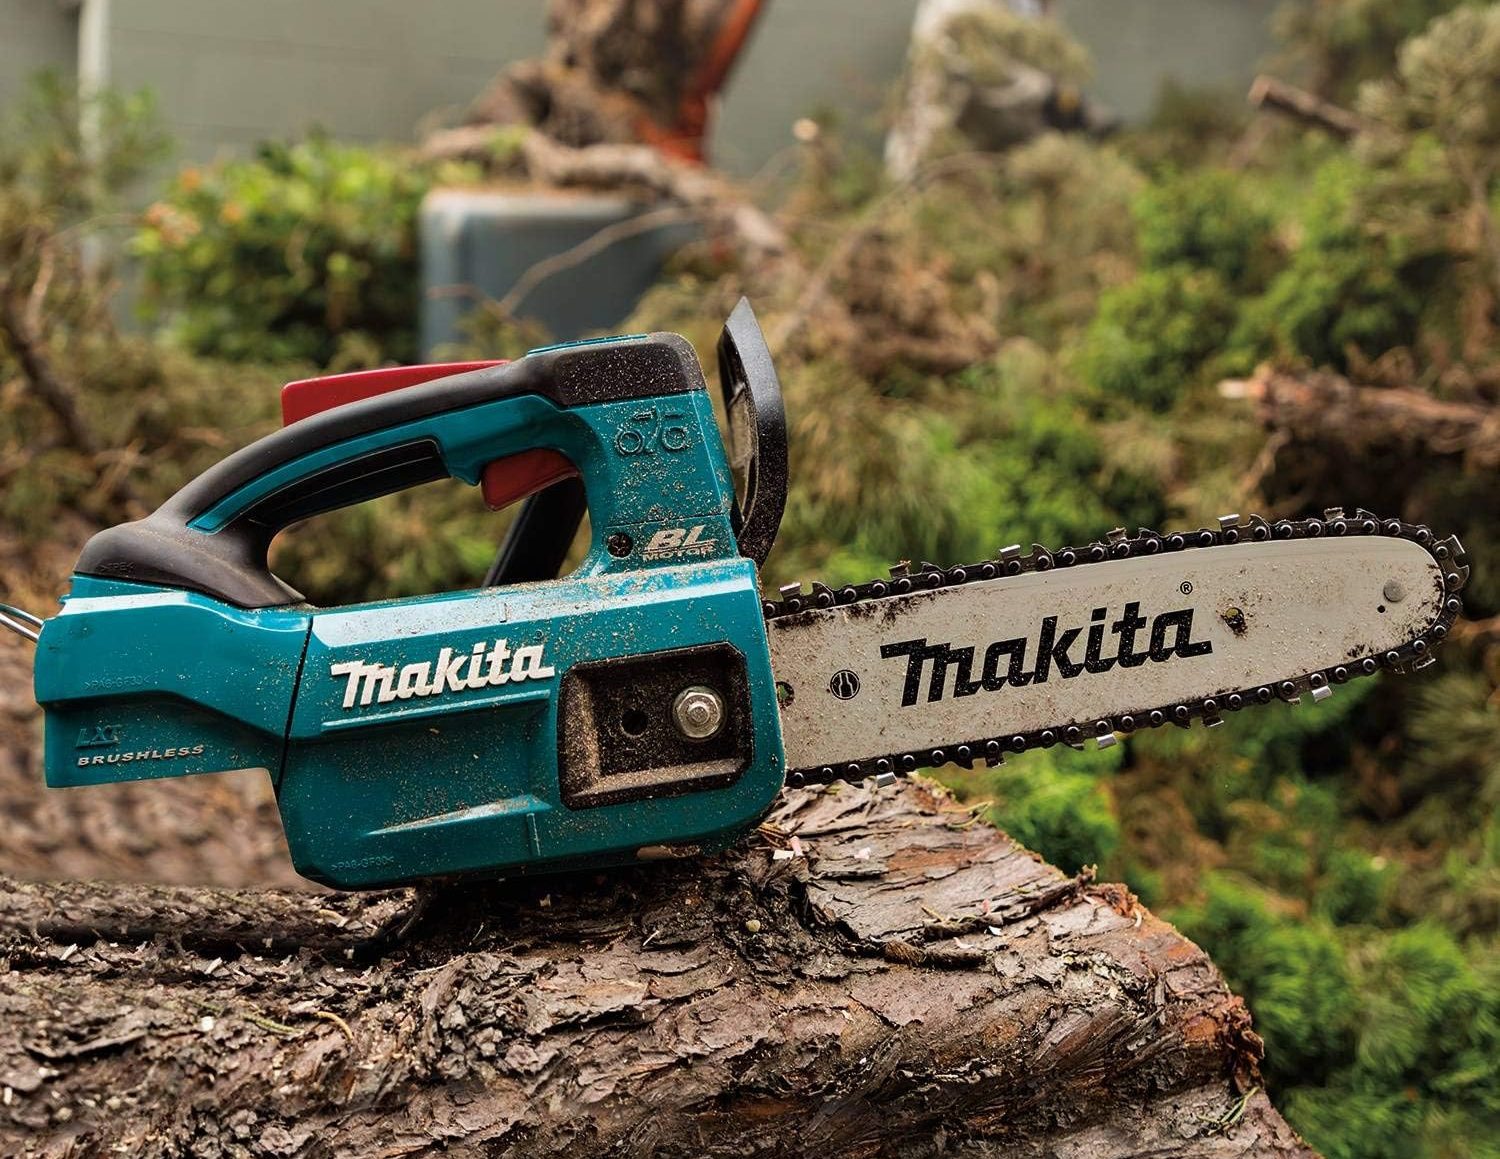 Superior construction materials and craftsmanship in high-quality chainsaws result in increased durability and longevity.